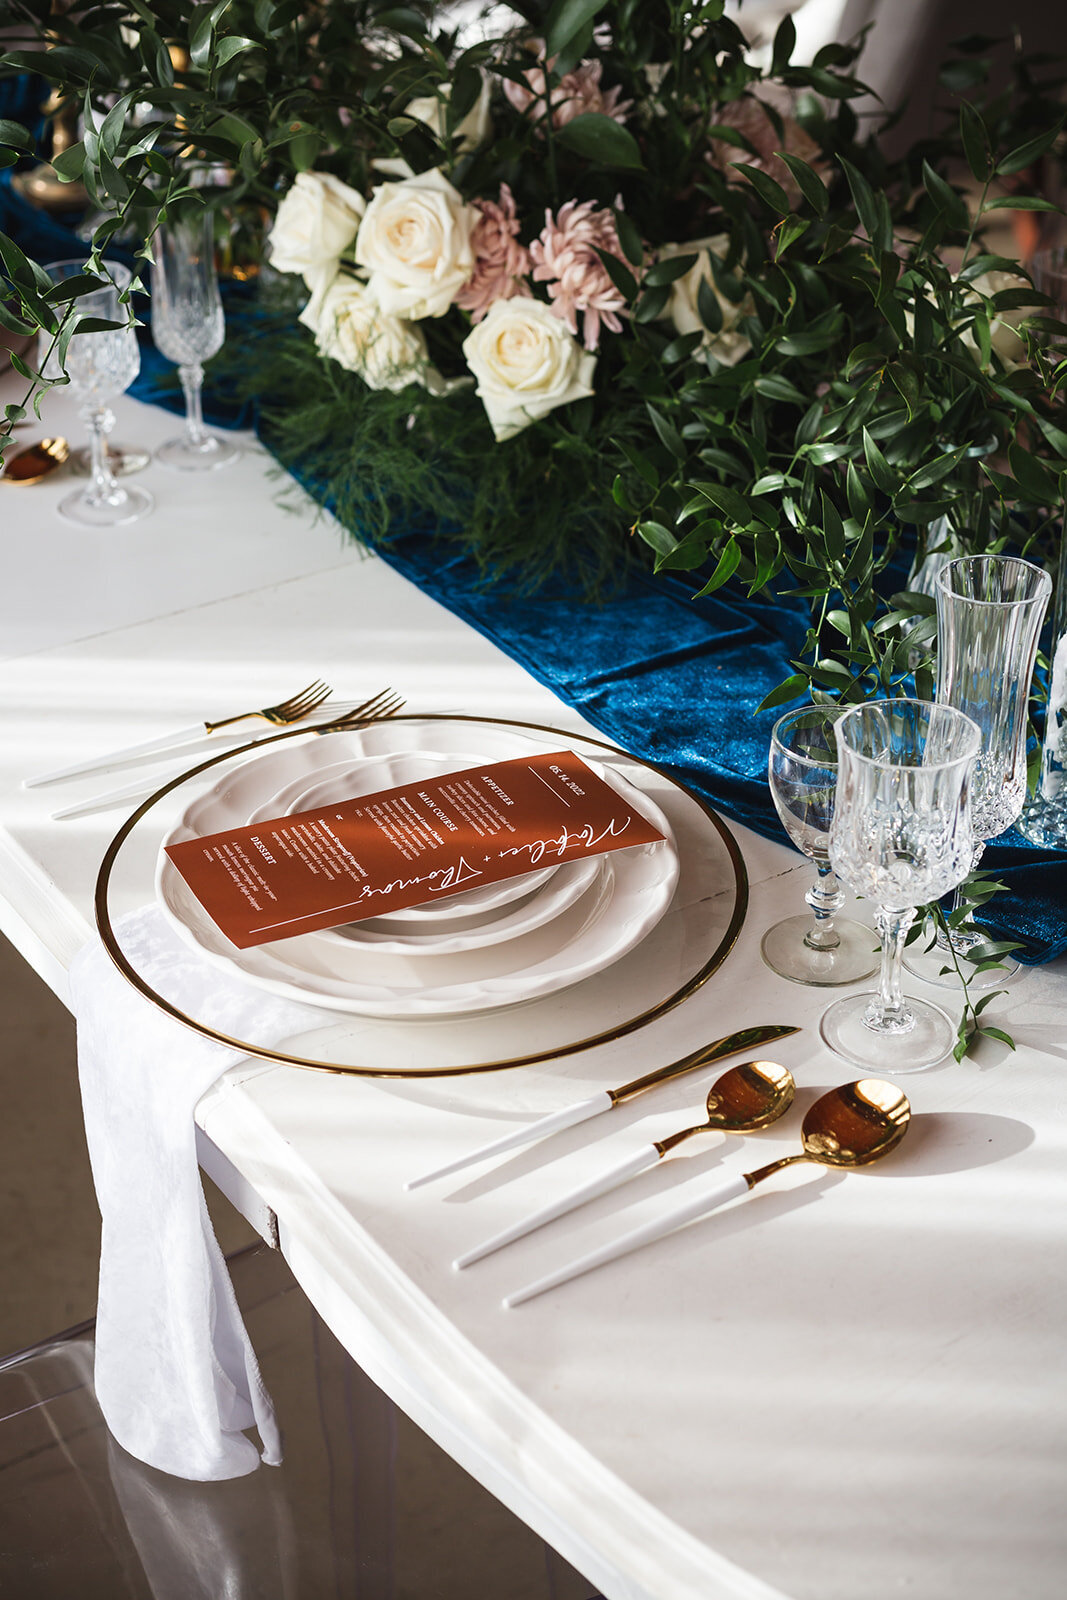 a copper menu on a white plate with a teal table runner and white roses